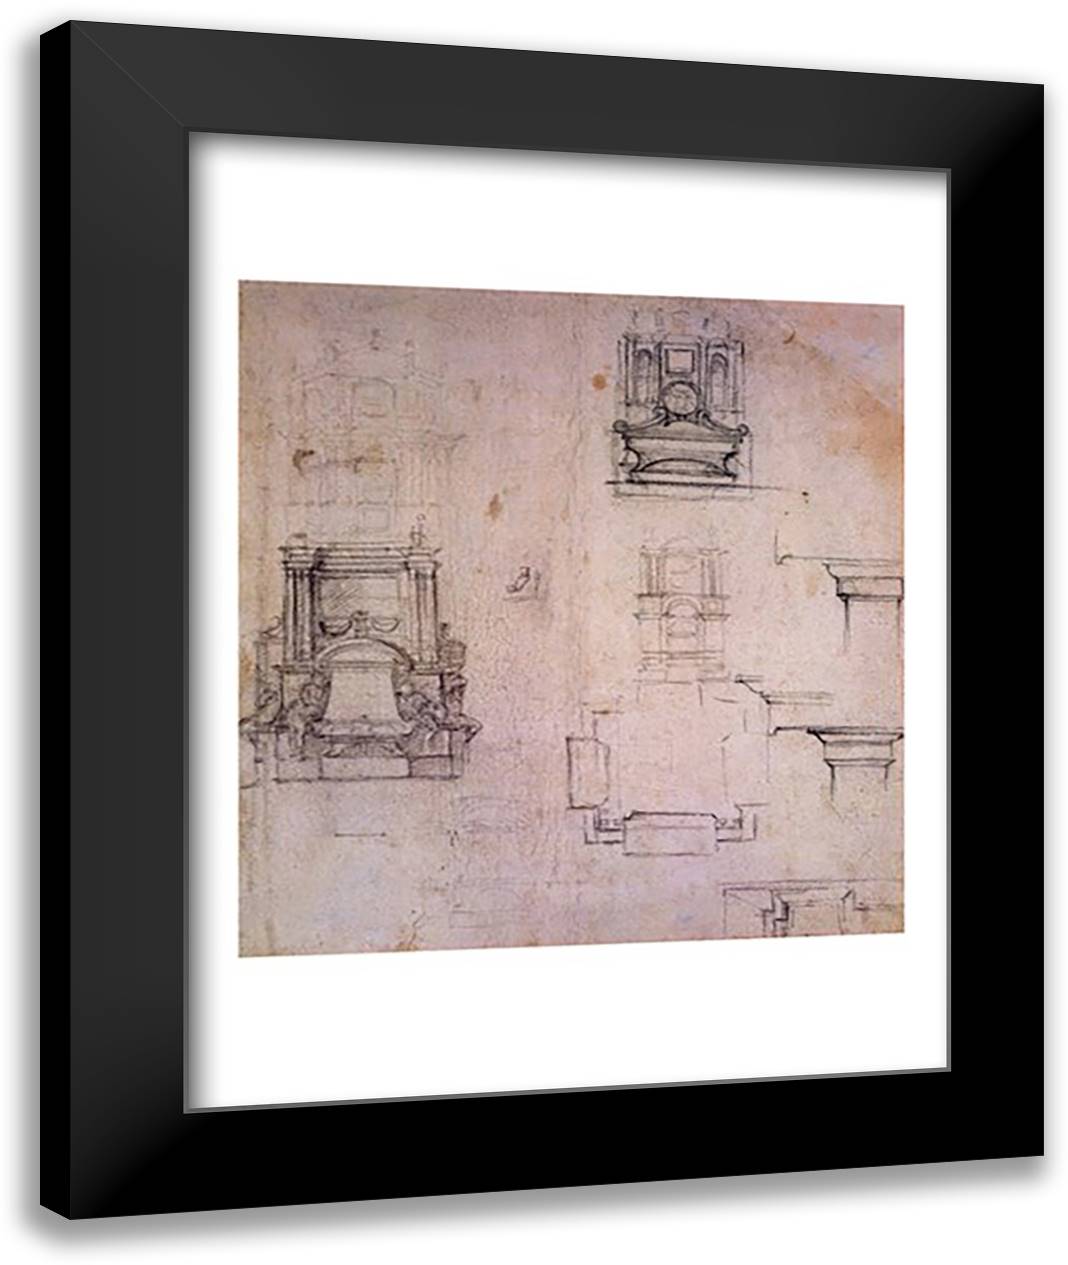 Inv. 1859 6-25-545. R. (W. 25) Designs for tombs 22x28 Black Modern Wood Framed Art Print Poster by Michelangelo